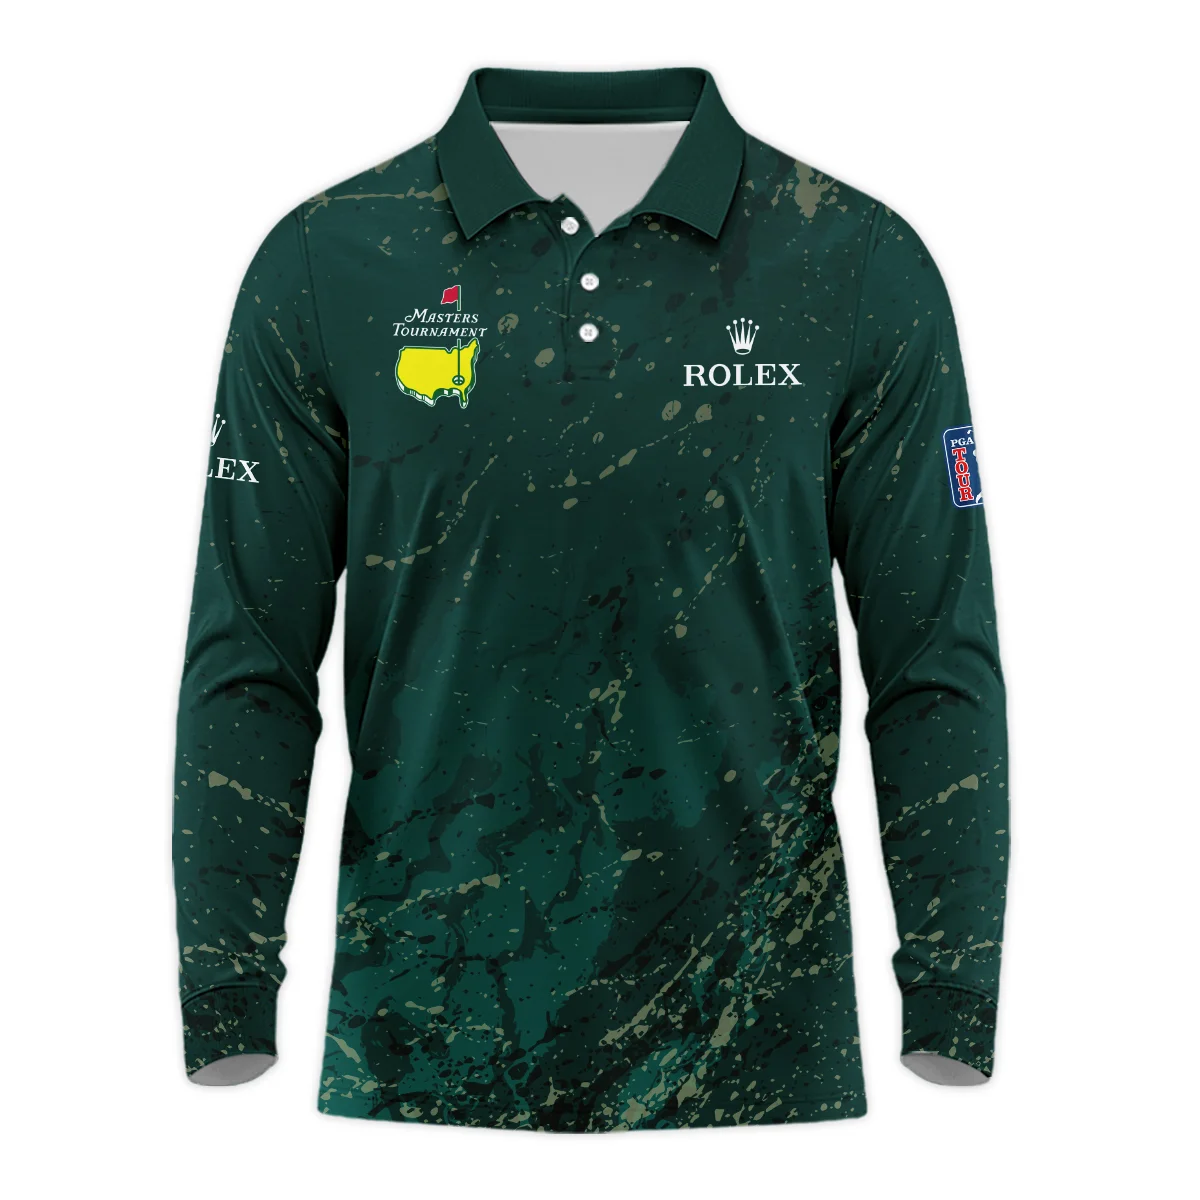 Old Cracked Texture With Gold Splash Paint Masters Tournament Rolex Zipper Polo Shirt Style Classic Zipper Polo Shirt For Men